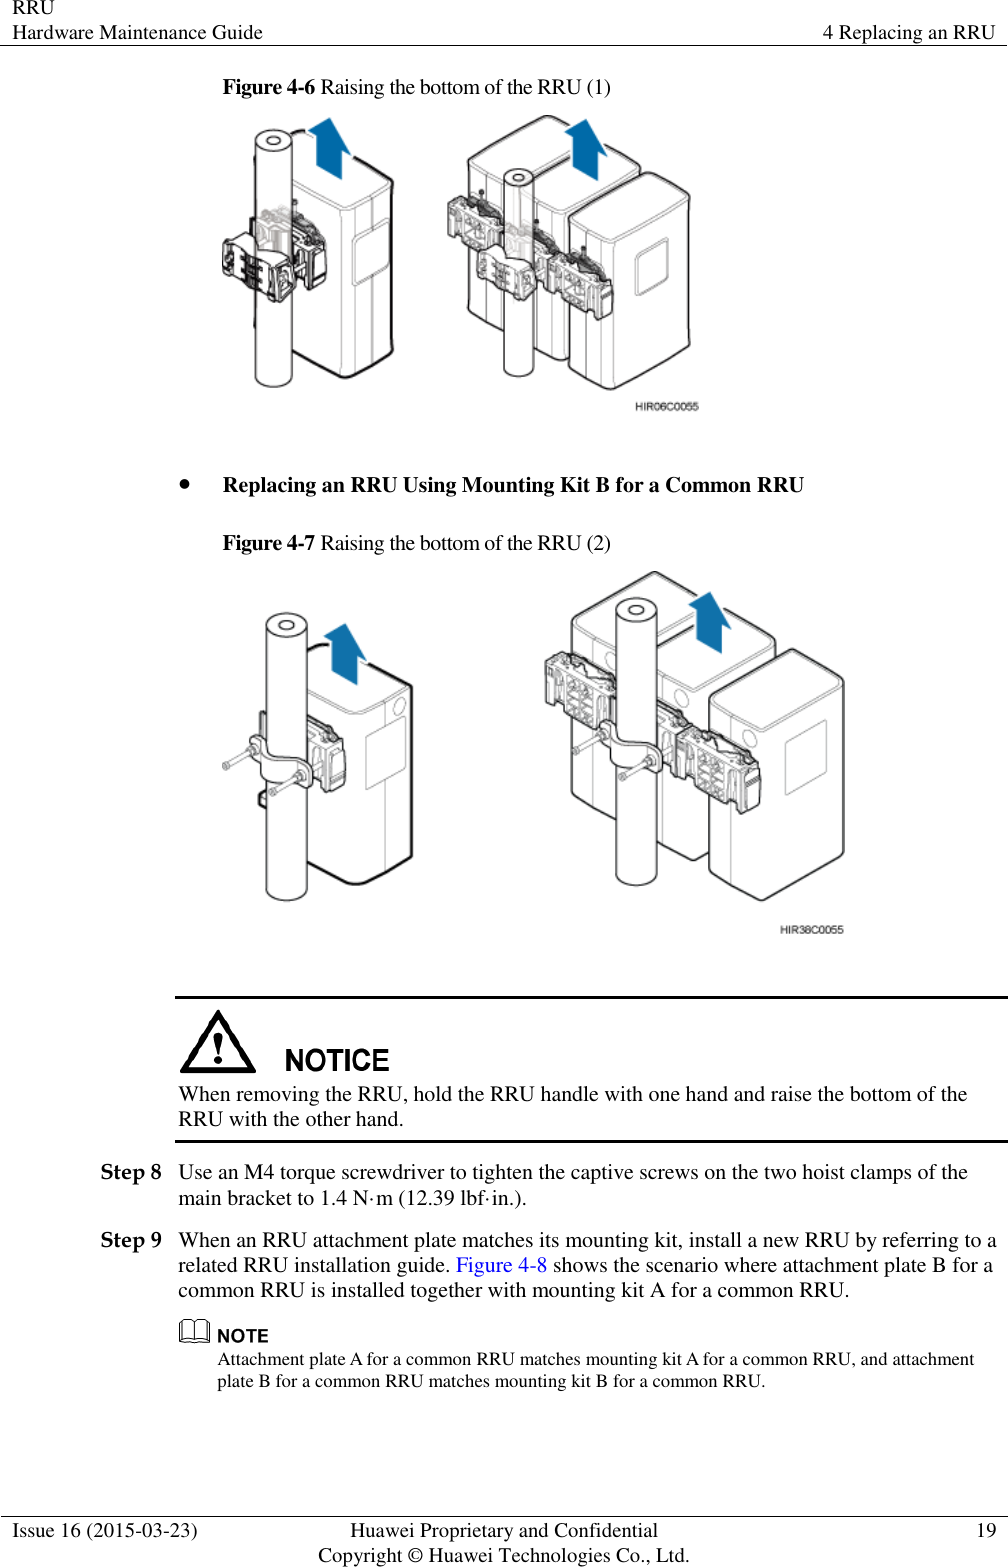 RRU Hardware Maintenance Guide 4 Replacing an RRU  Issue 16 (2015-03-23) Huawei Proprietary and Confidential                                     Copyright © Huawei Technologies Co., Ltd. 19  Figure 4-6 Raising the bottom of the RRU (1)    Replacing an RRU Using Mounting Kit B for a Common RRU Figure 4-7 Raising the bottom of the RRU (2)    When removing the RRU, hold the RRU handle with one hand and raise the bottom of the RRU with the other hand. Step 8 Use an M4 torque screwdriver to tighten the captive screws on the two hoist clamps of the main bracket to 1.4 N·m (12.39 lbf·in.). Step 9 When an RRU attachment plate matches its mounting kit, install a new RRU by referring to a related RRU installation guide. Figure 4-8 shows the scenario where attachment plate B for a common RRU is installed together with mounting kit A for a common RRU.  Attachment plate A for a common RRU matches mounting kit A for a common RRU, and attachment plate B for a common RRU matches mounting kit B for a common RRU. 